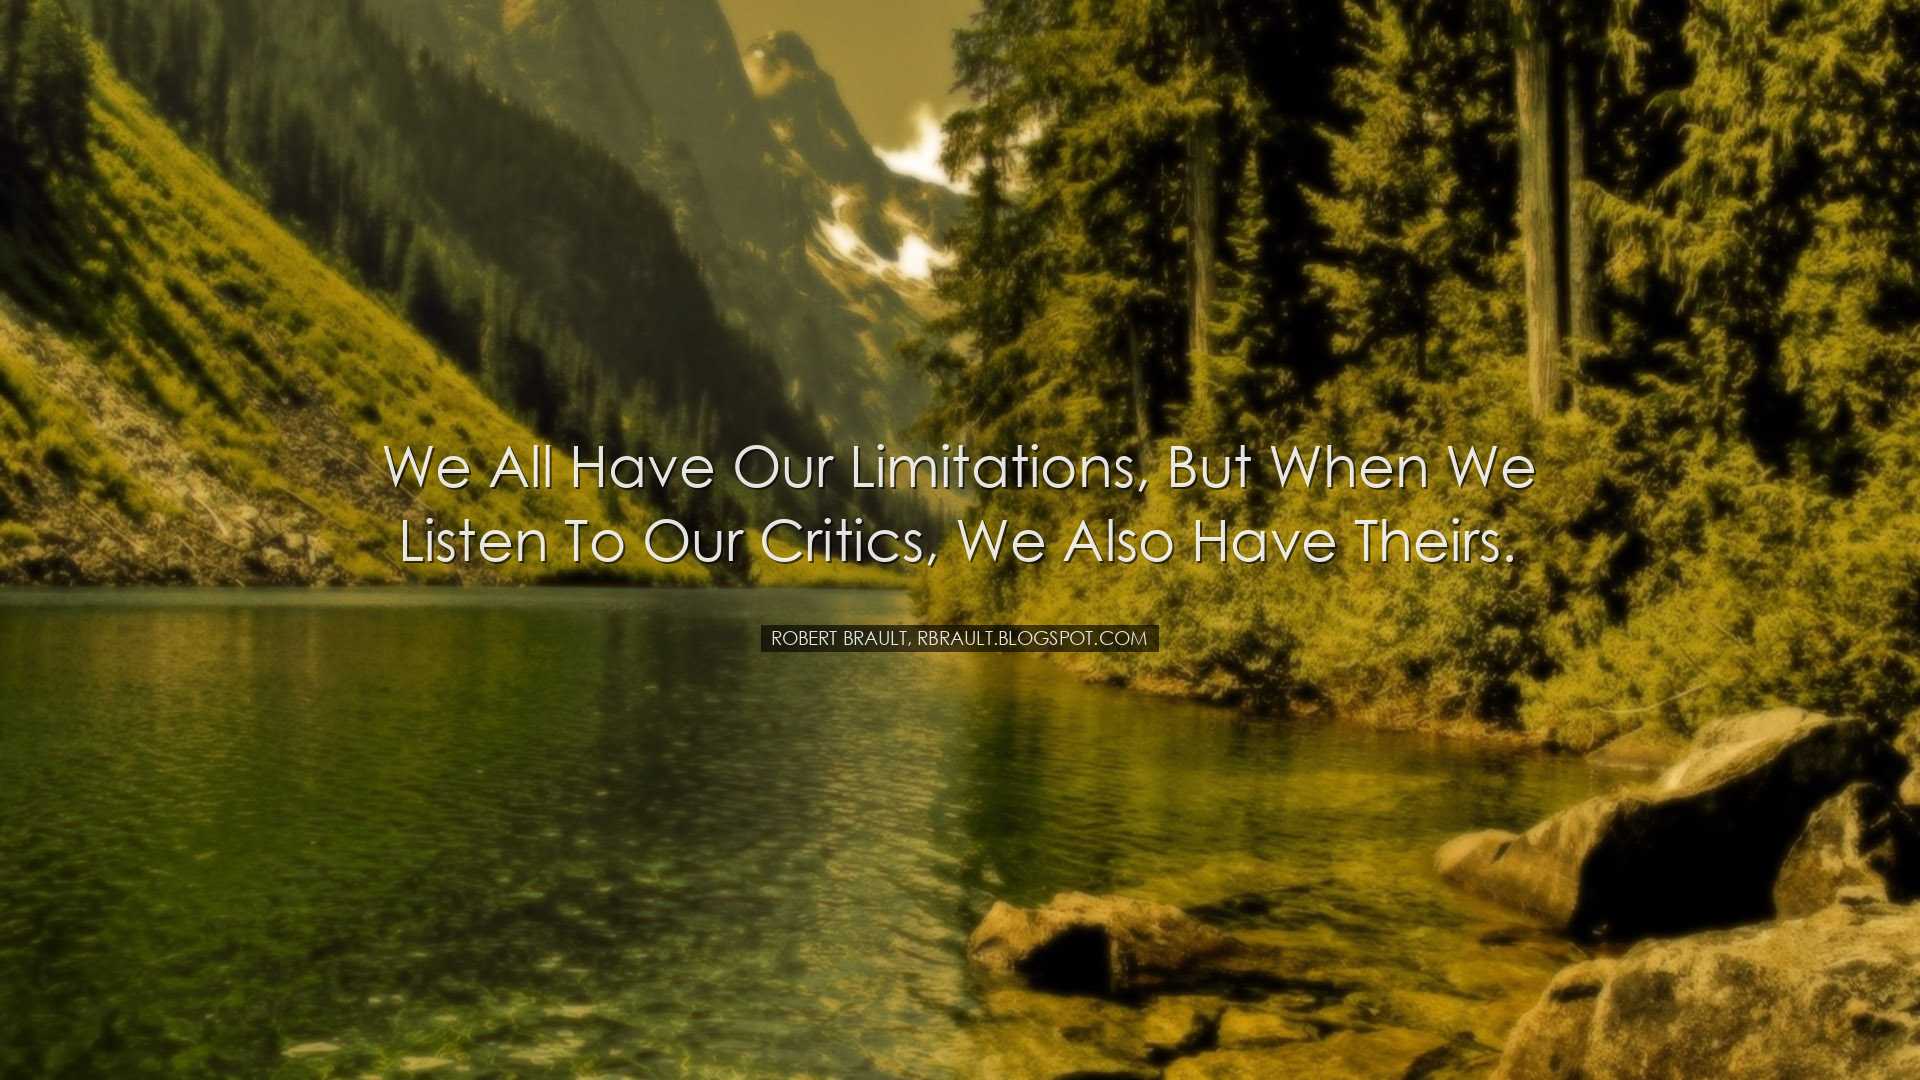 We all have our limitations, but when we listen to our critics, we